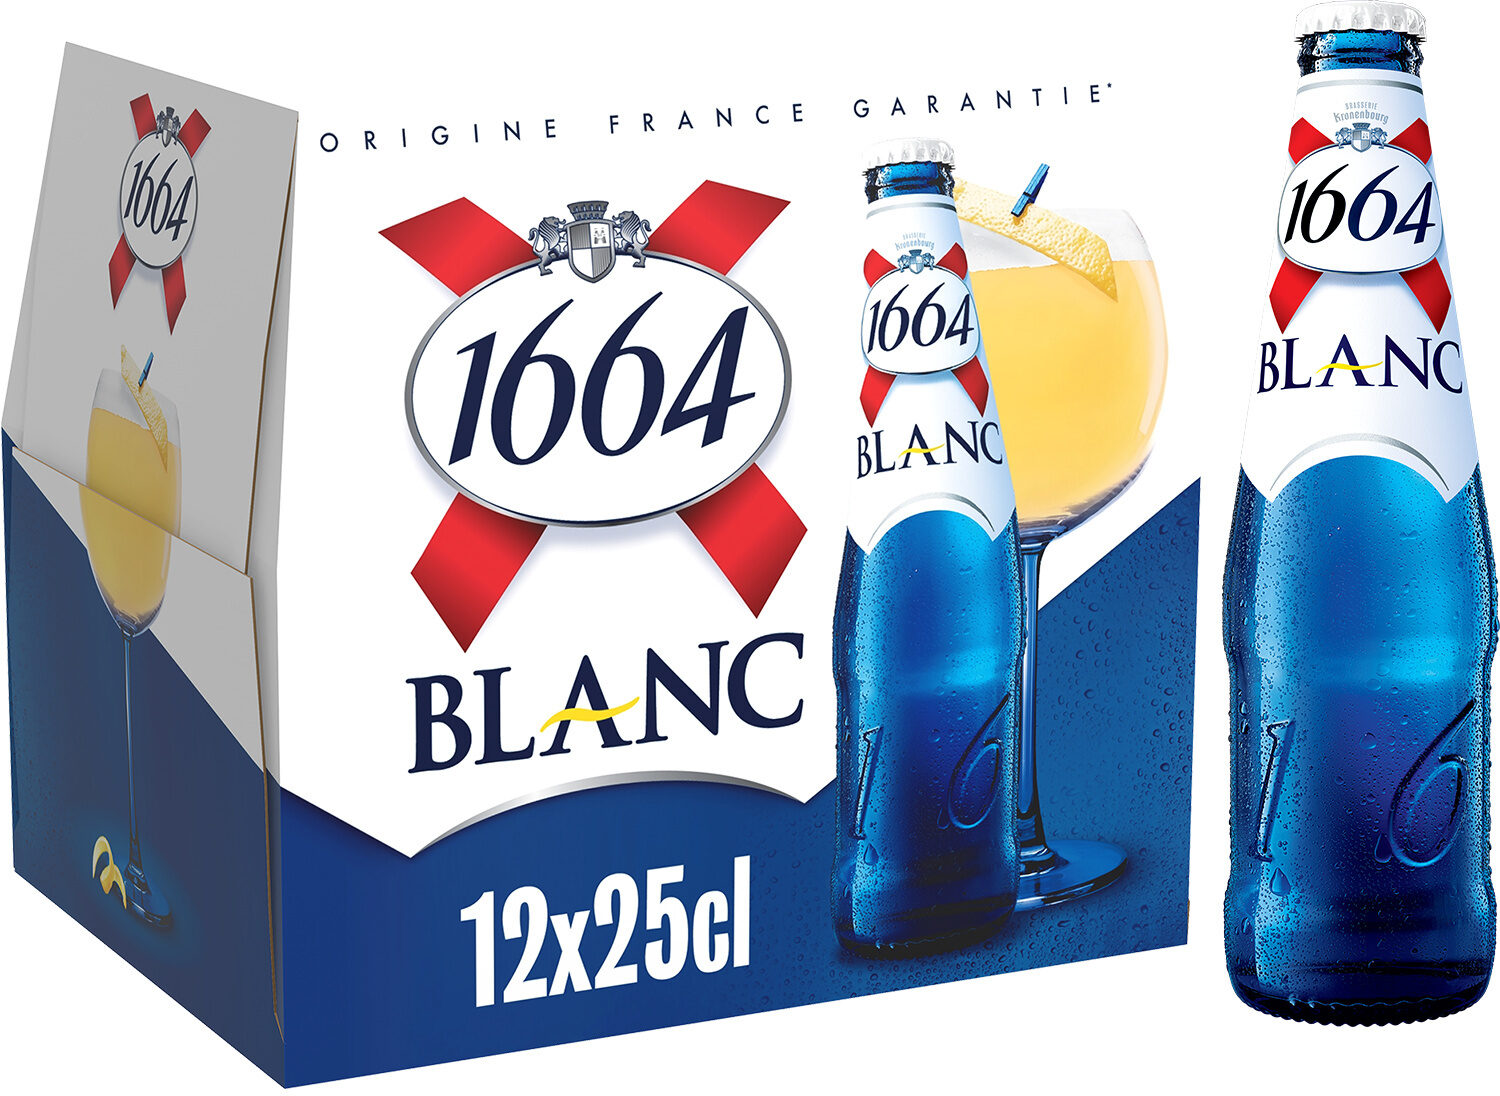 1664 12x25cl 1664 blanc 5.0 degre alcool - Producto - fr